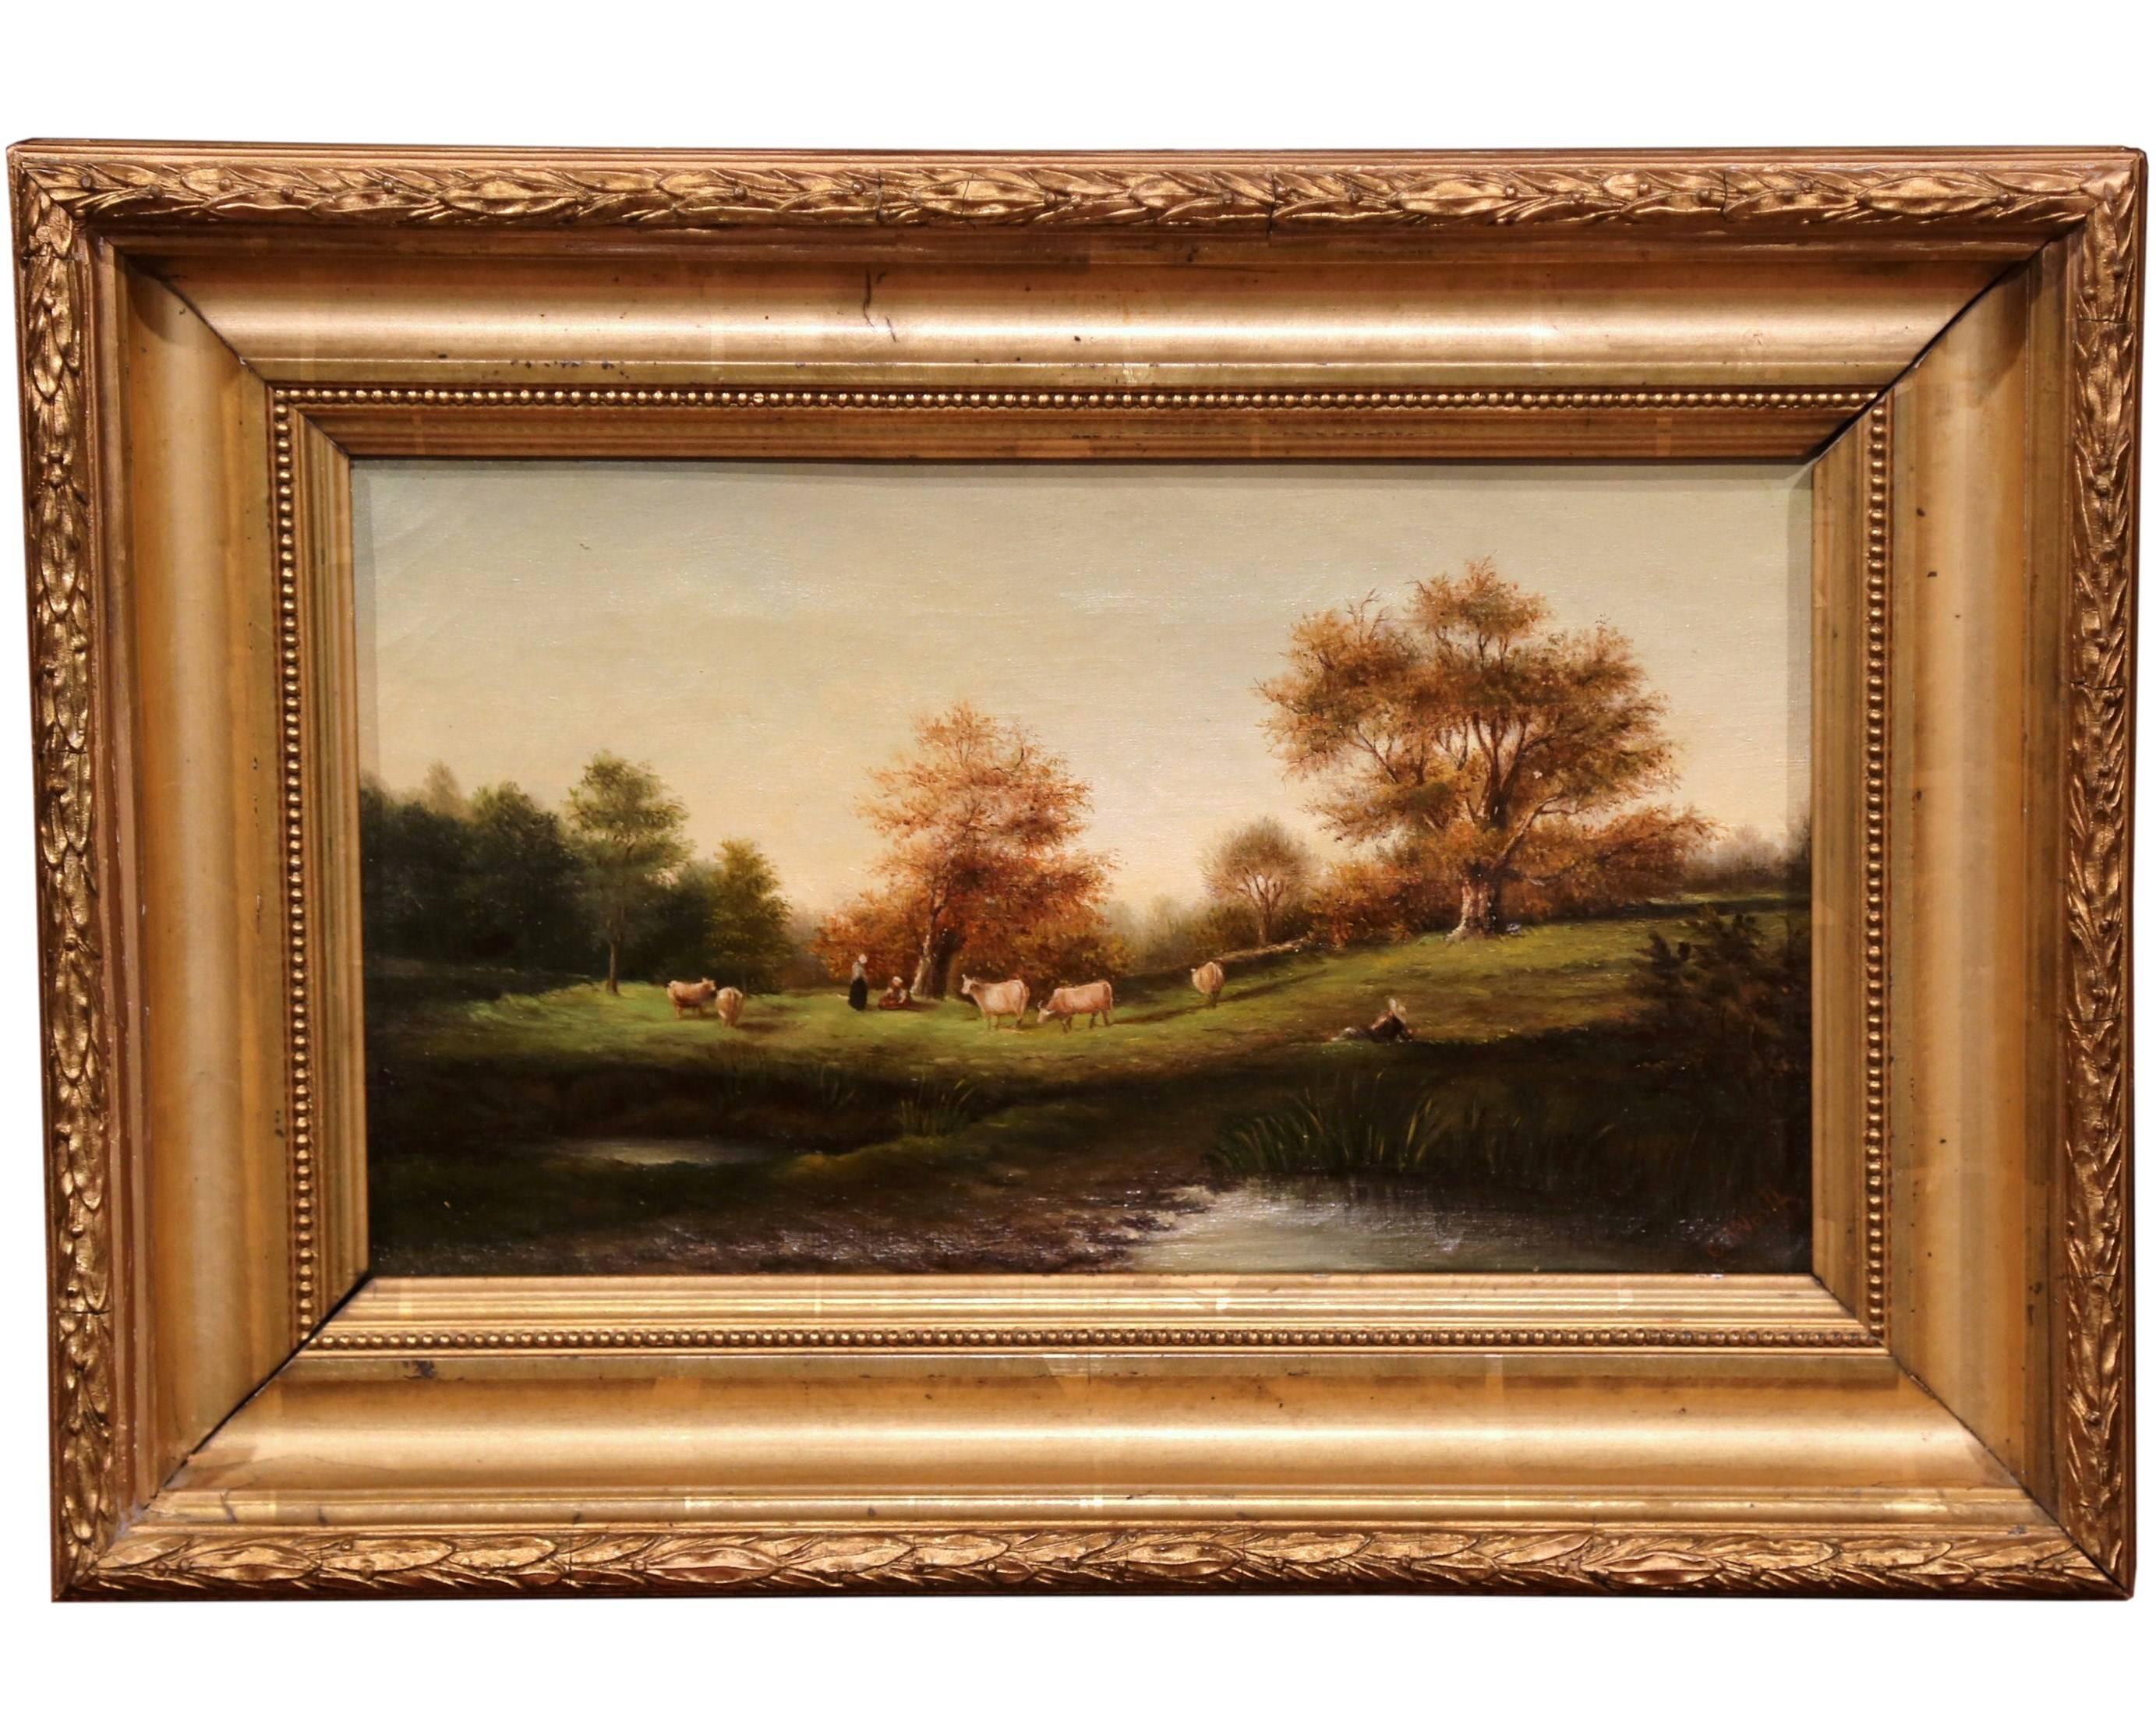 Unknown Landscape Painting - 18th Century Oil on Canvas Painting Signed Wolff